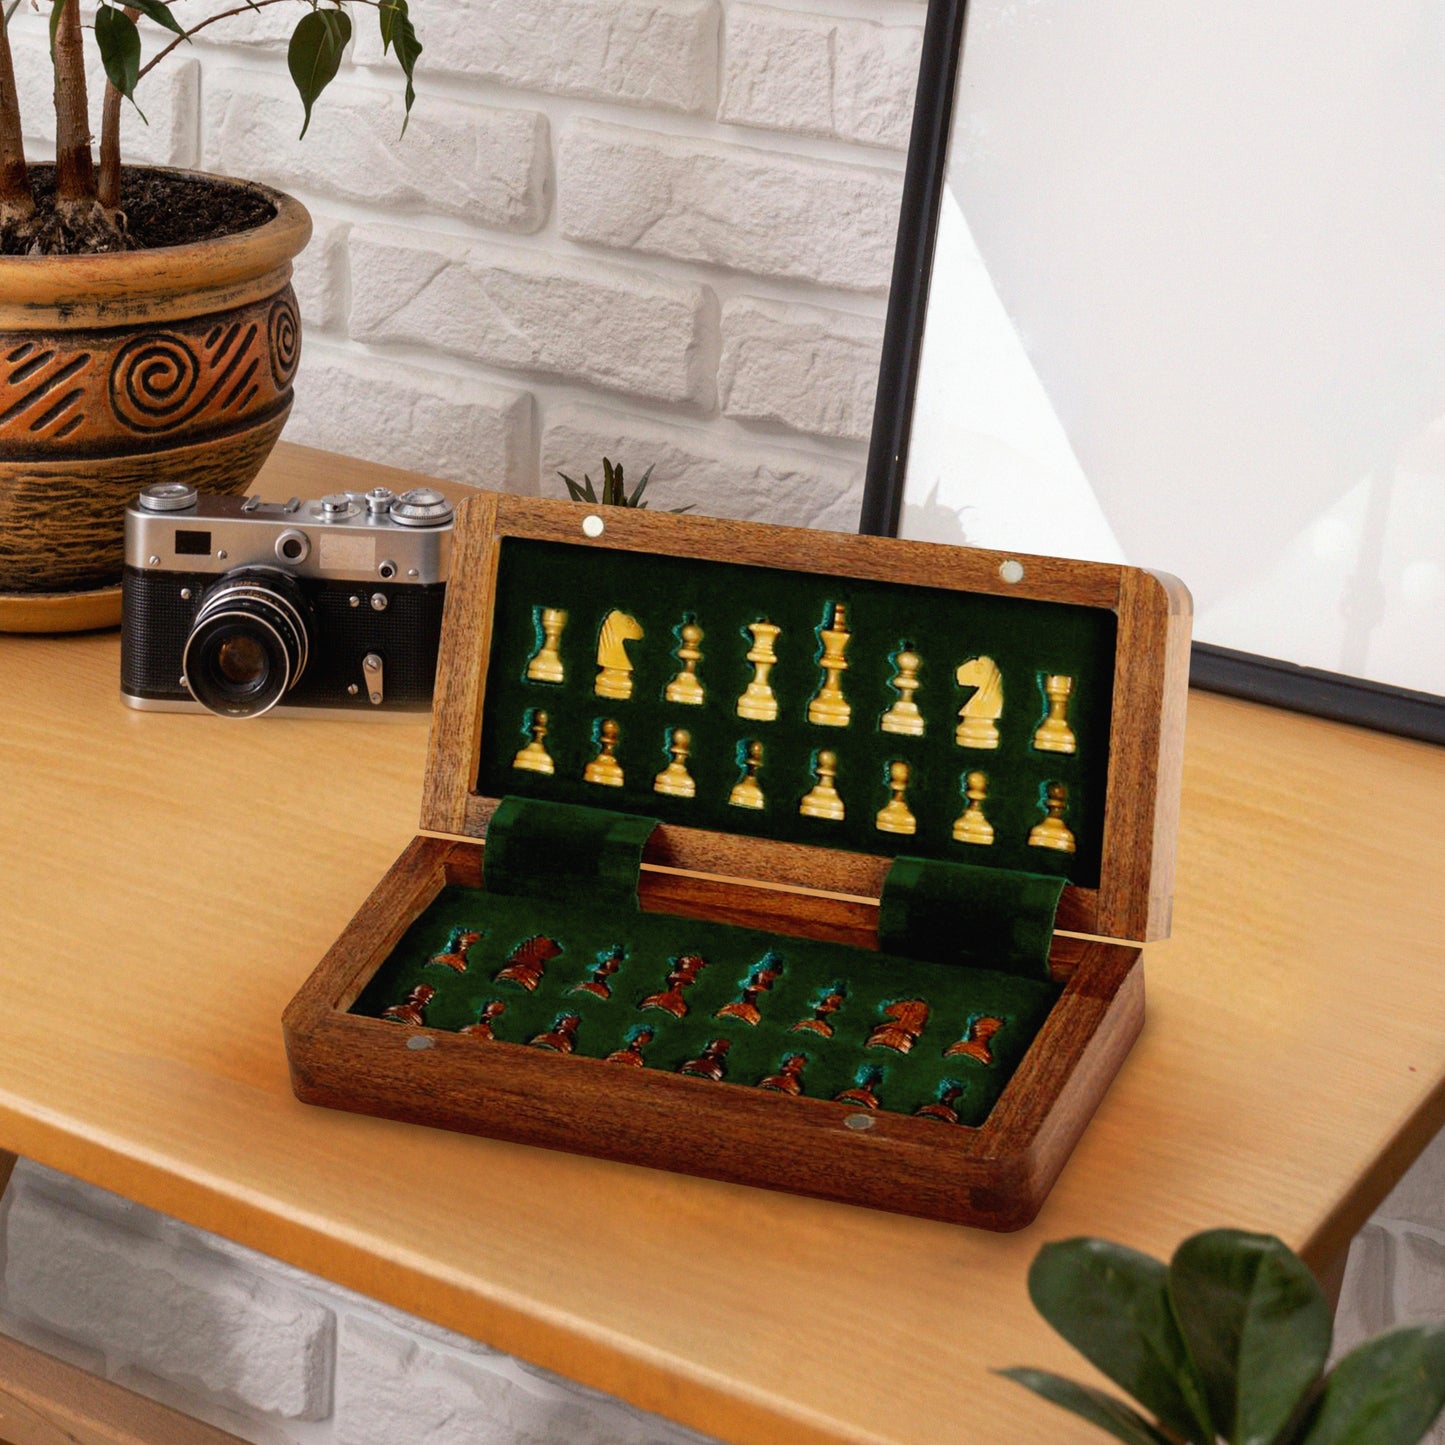 Travel chess set - Mini Chess Set - Magnetic Wooden Chess Sets with Board 7" (18 cm) - gift for him - 7 x 3.6 x 0.7 inches